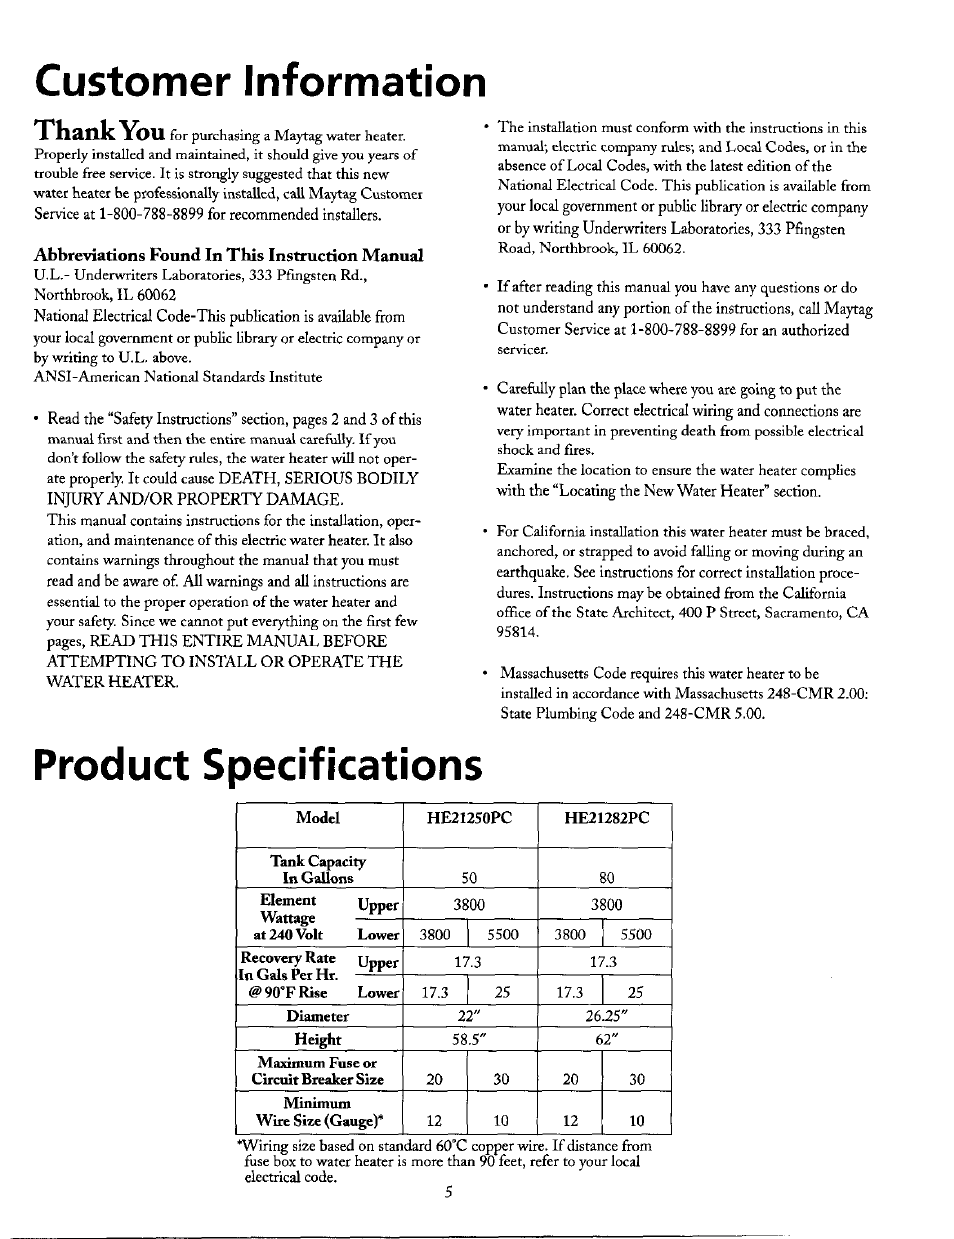 Product specifications, Customer information | Maytag HE21250PC User Manual | Page 5 / 40